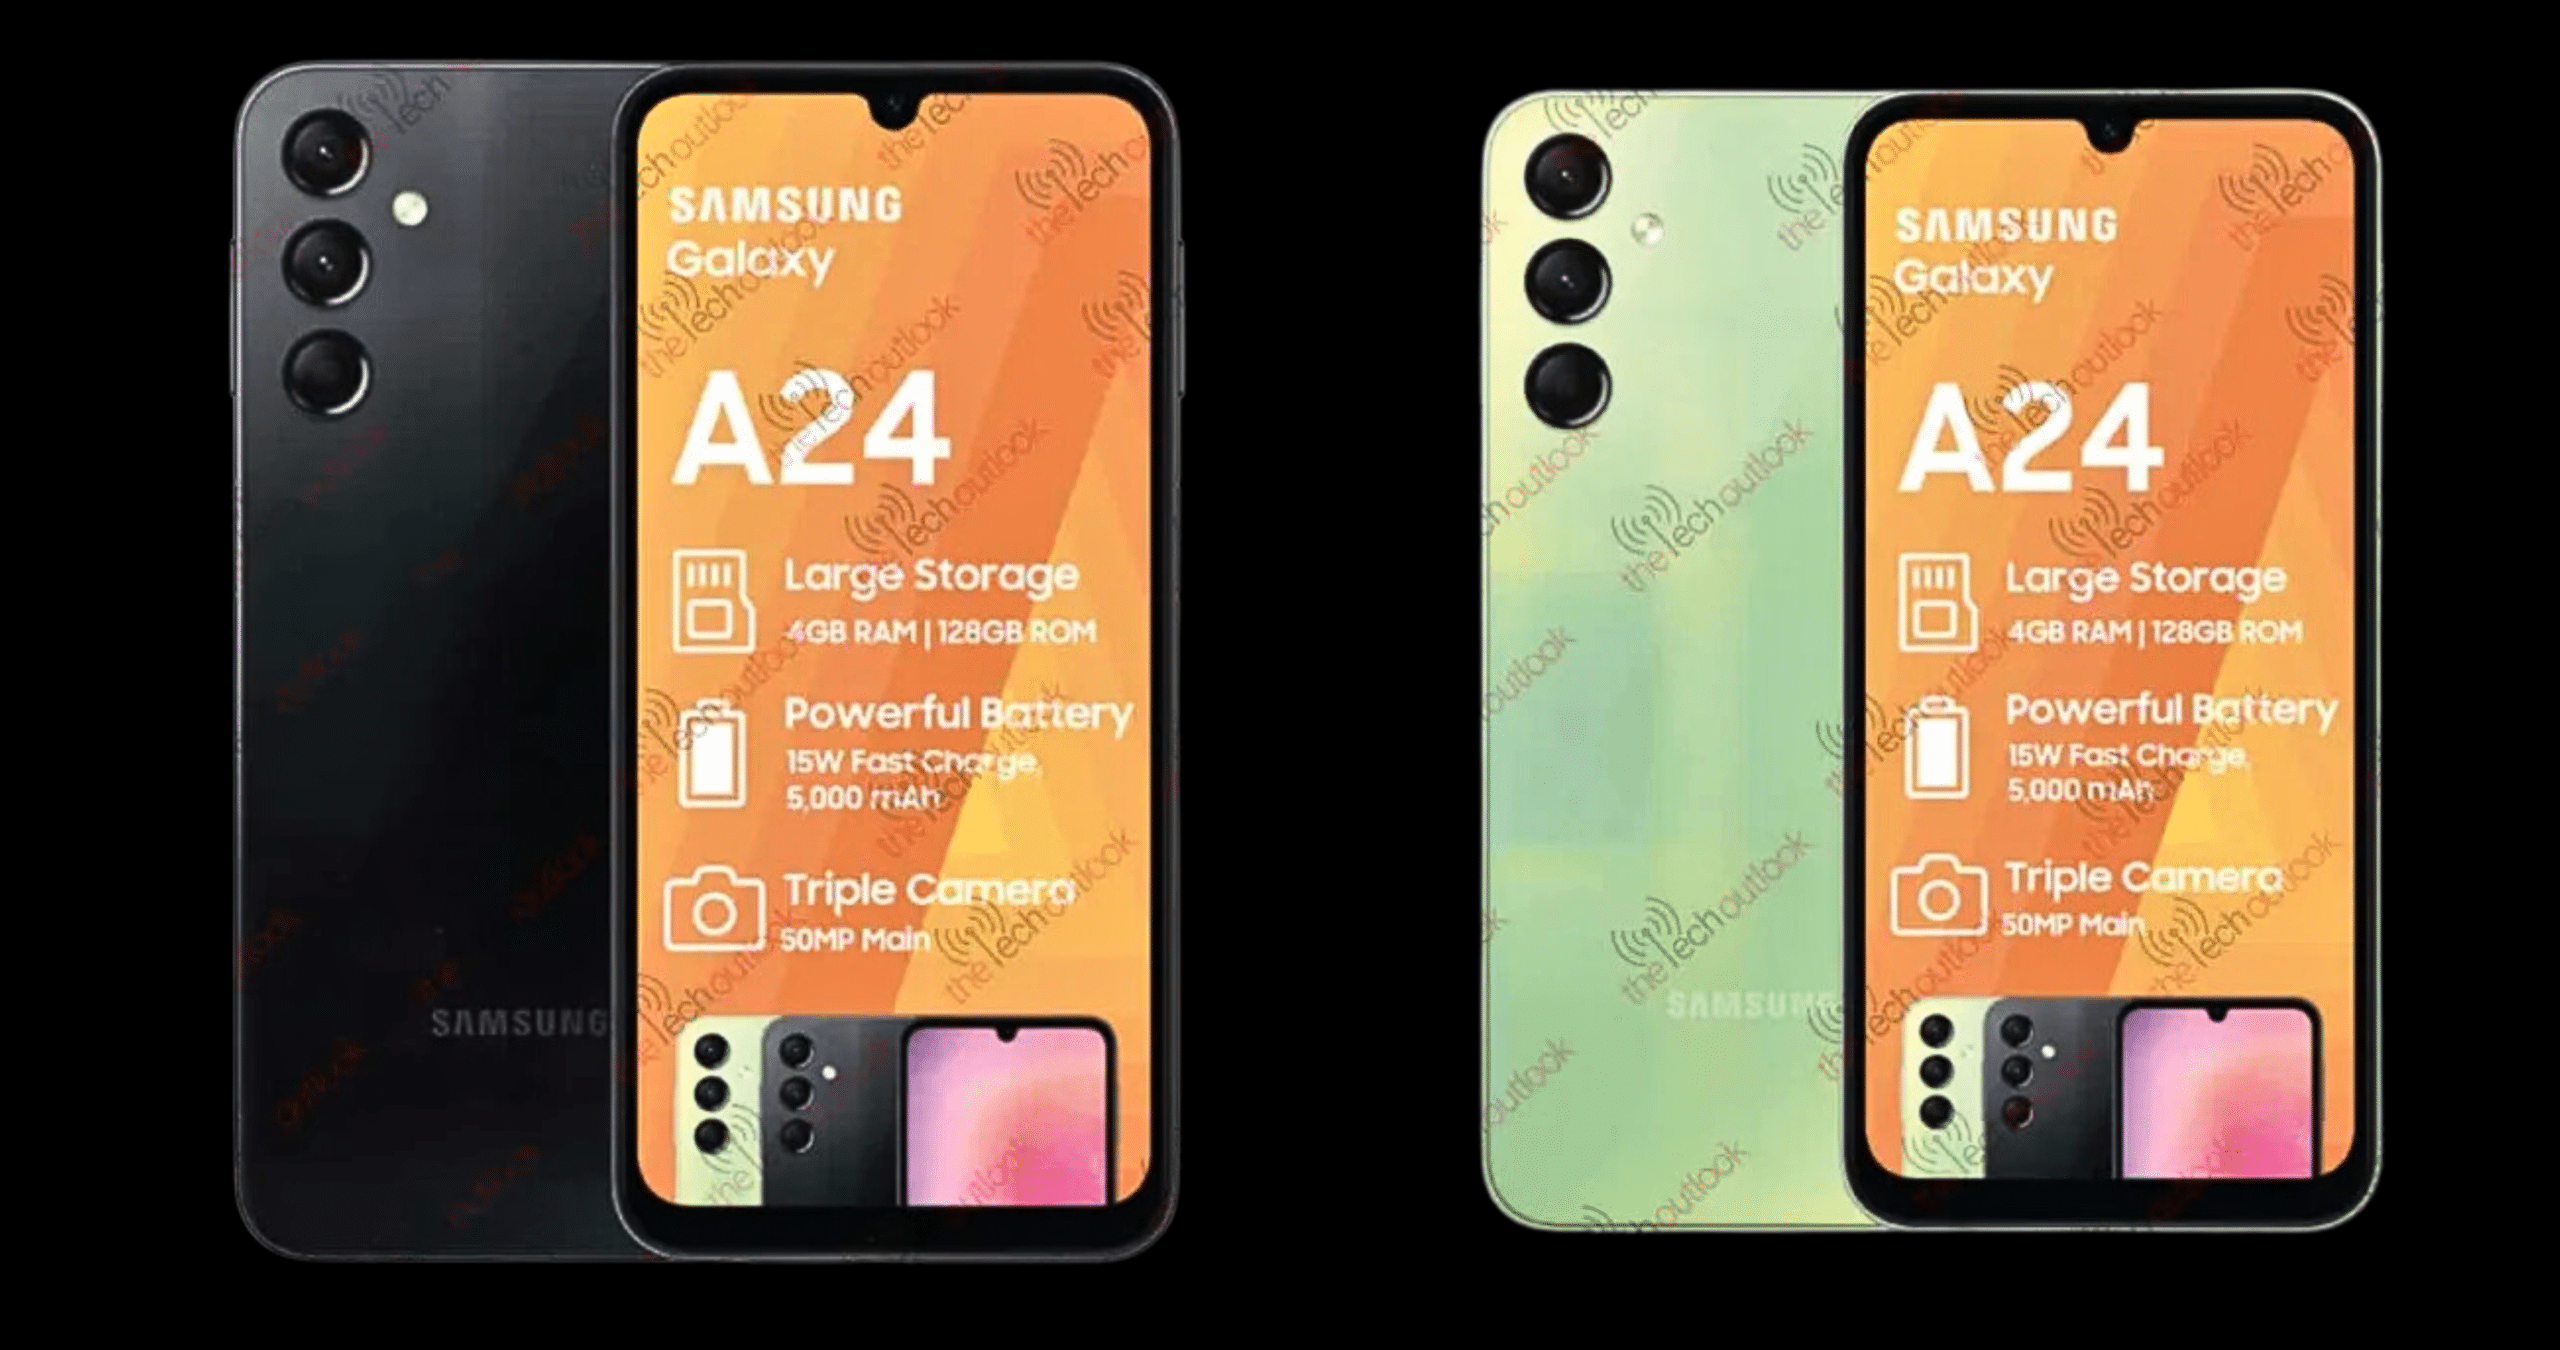 Samsung Galaxy A24 render are leaked